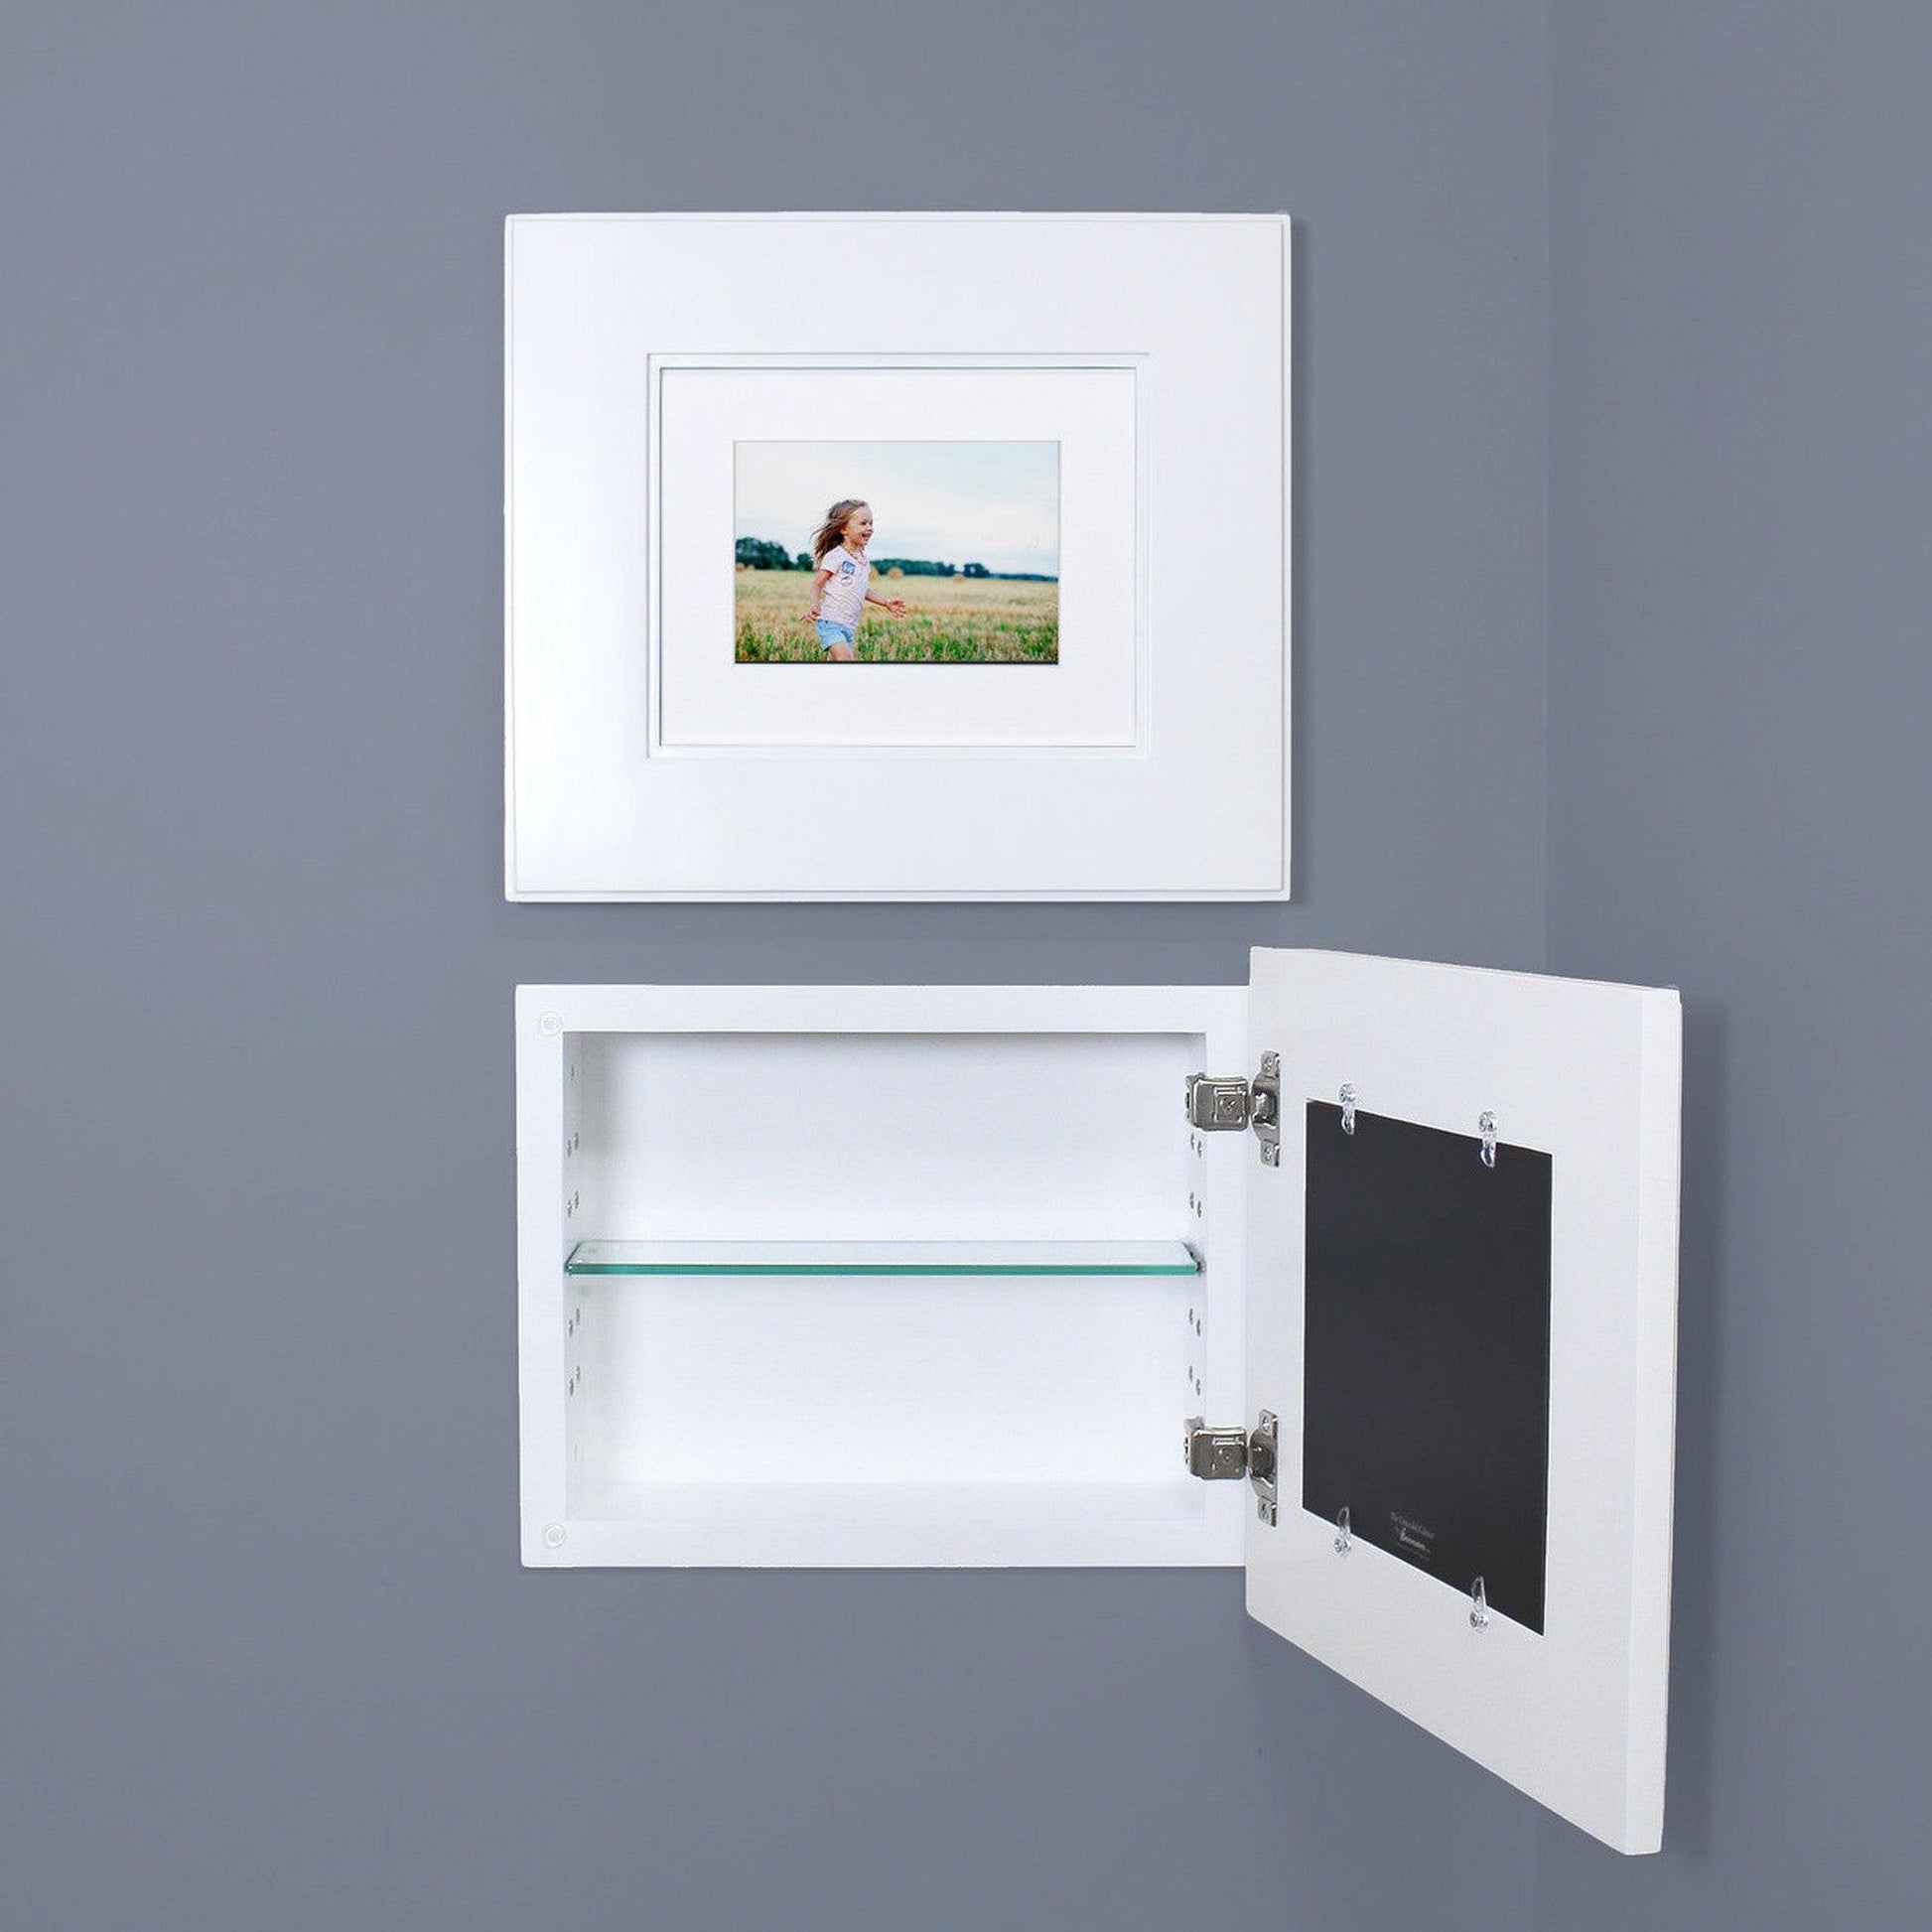 Fox Hollow Furnishings 14" x 11" White Compact Landscapehaker Special 6" Depth Recessed Picture Frame Medicine Cabinet With Mirror